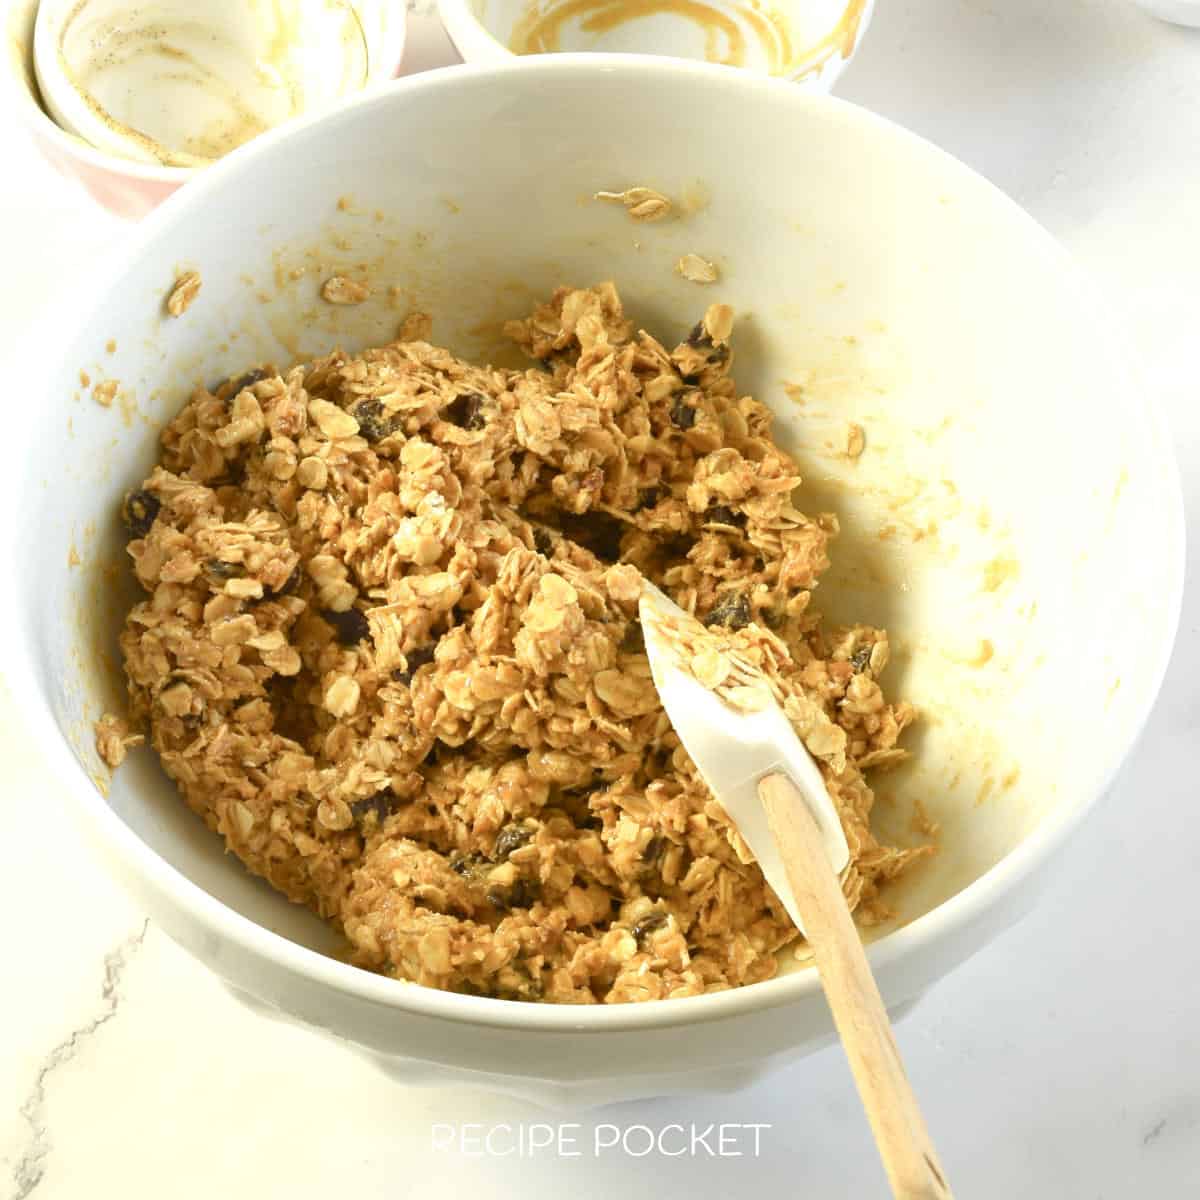 Peanut butter oatmeal ball mixture in a mixing bowl.